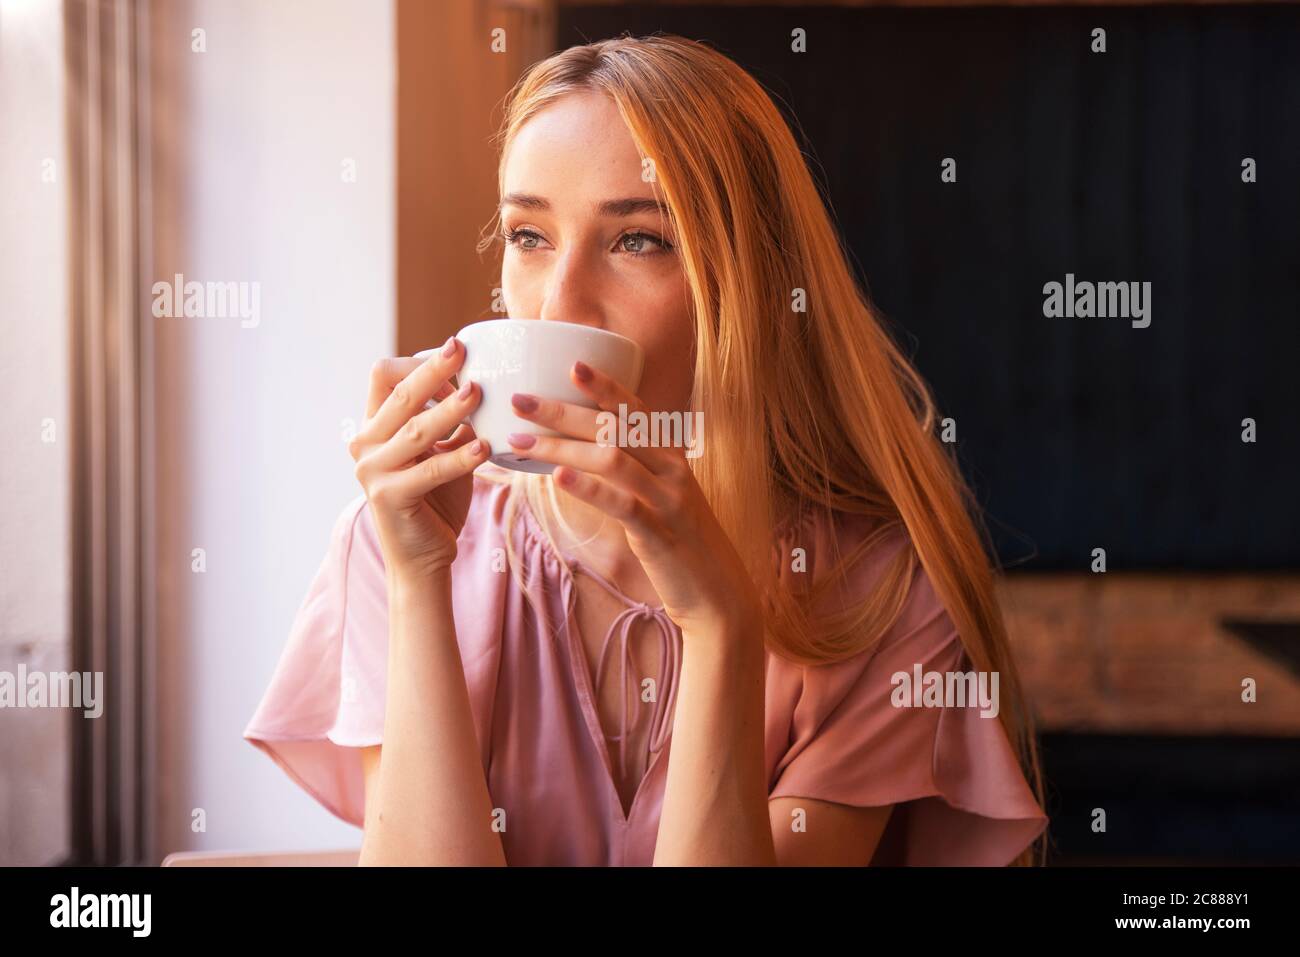 Portrait of young woman sitting at cafe with cup of coffee and looking away while daydreaming. Stock Photo